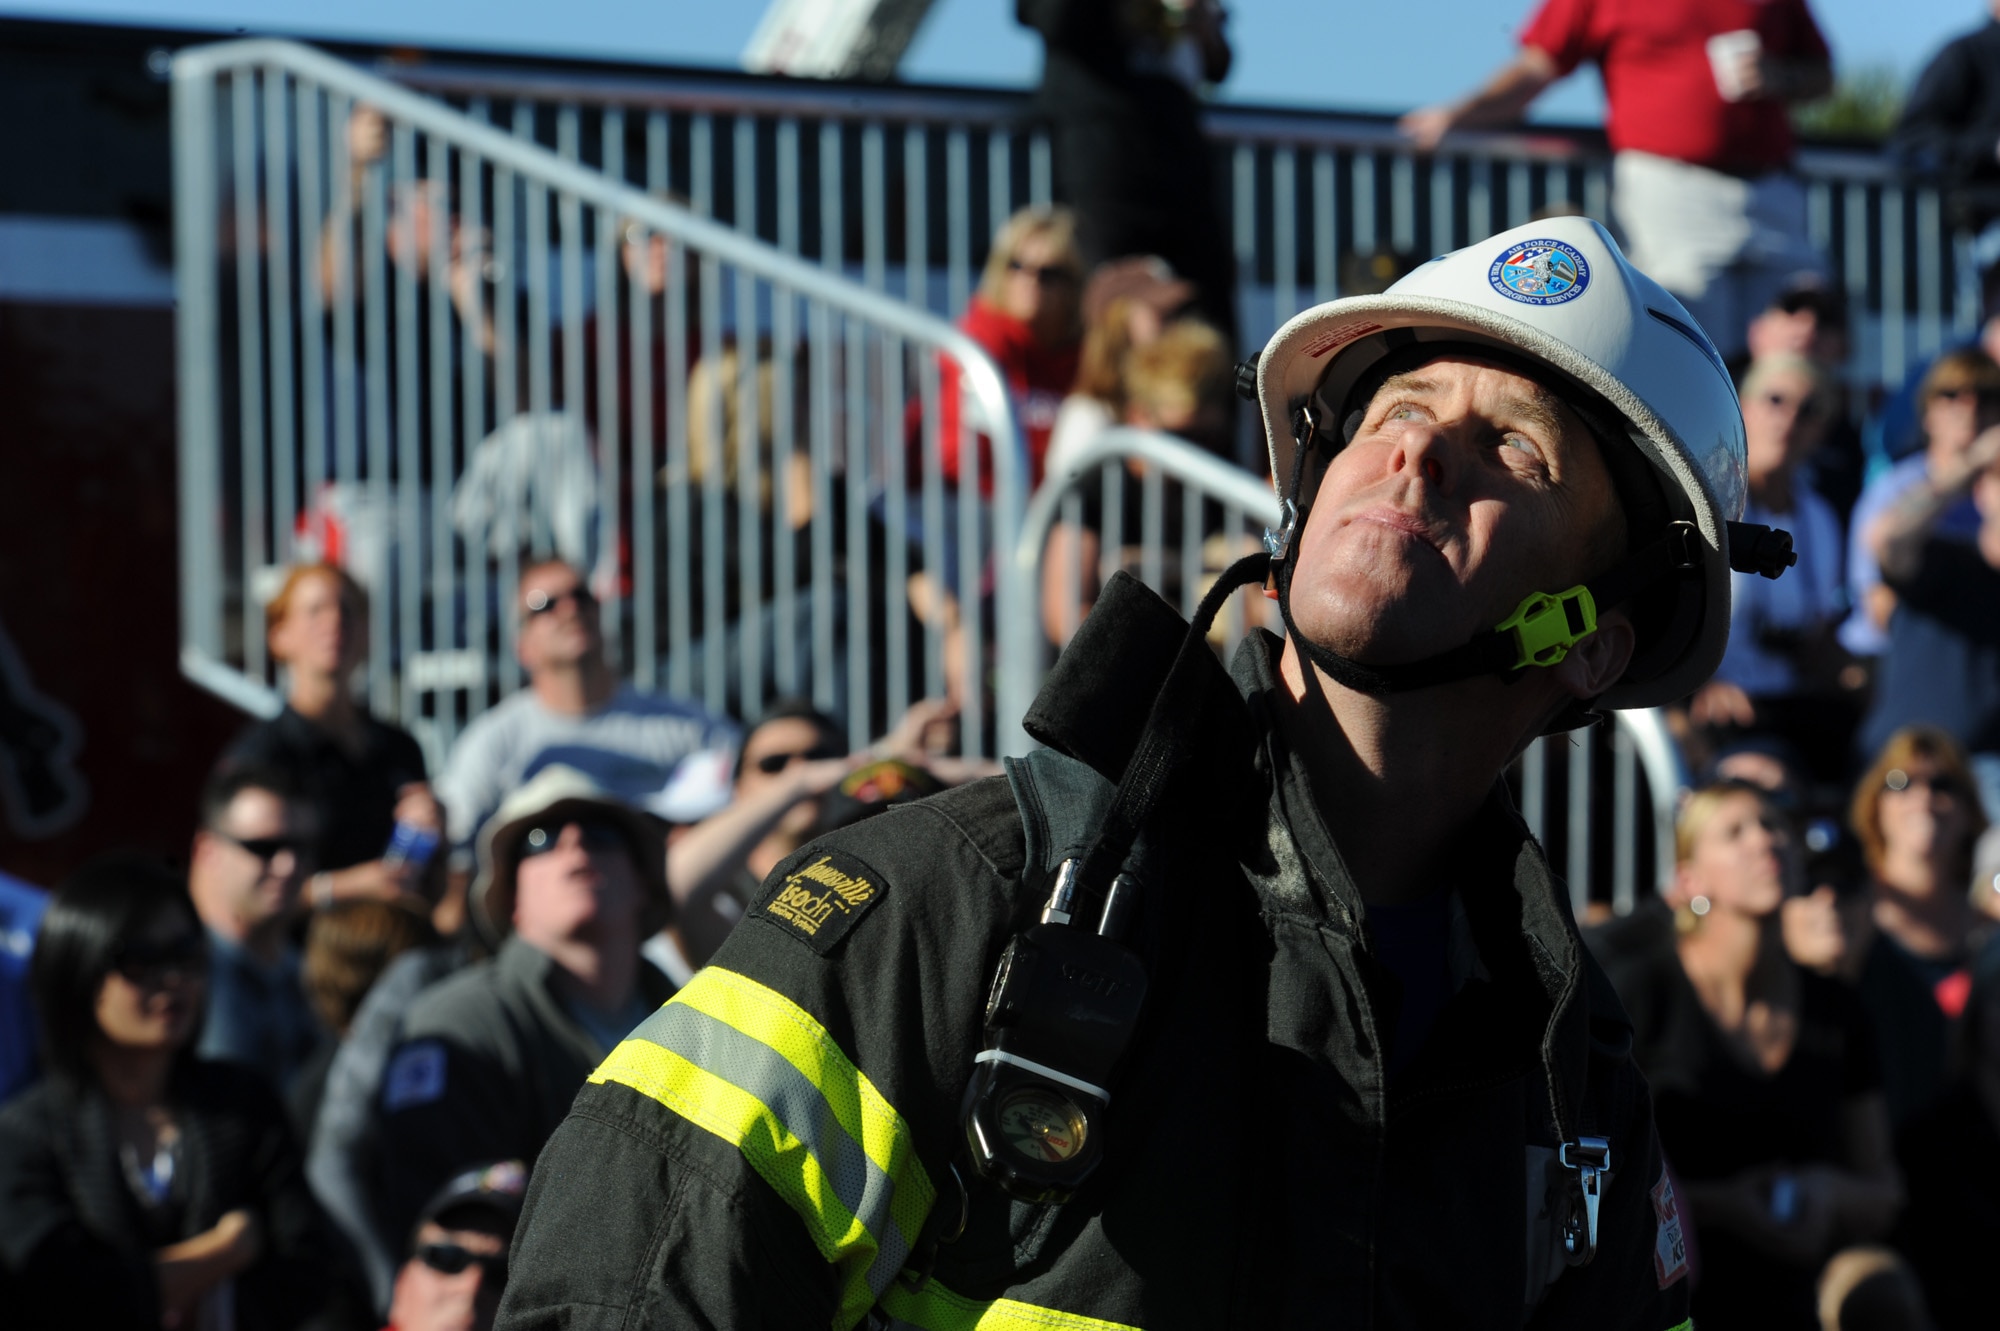 Ken Helgerson waits for his teammate to pass the baton as he competes in the team relay event at Myrtle Beach, S.C., on Nov. 13, 2010. Mr. Helgerson is a firefighter at the Air Force Academy in Colorado Springs, Colo. (U.S. Air Force photo/Staff Sgt. Desiree N. Palacios)